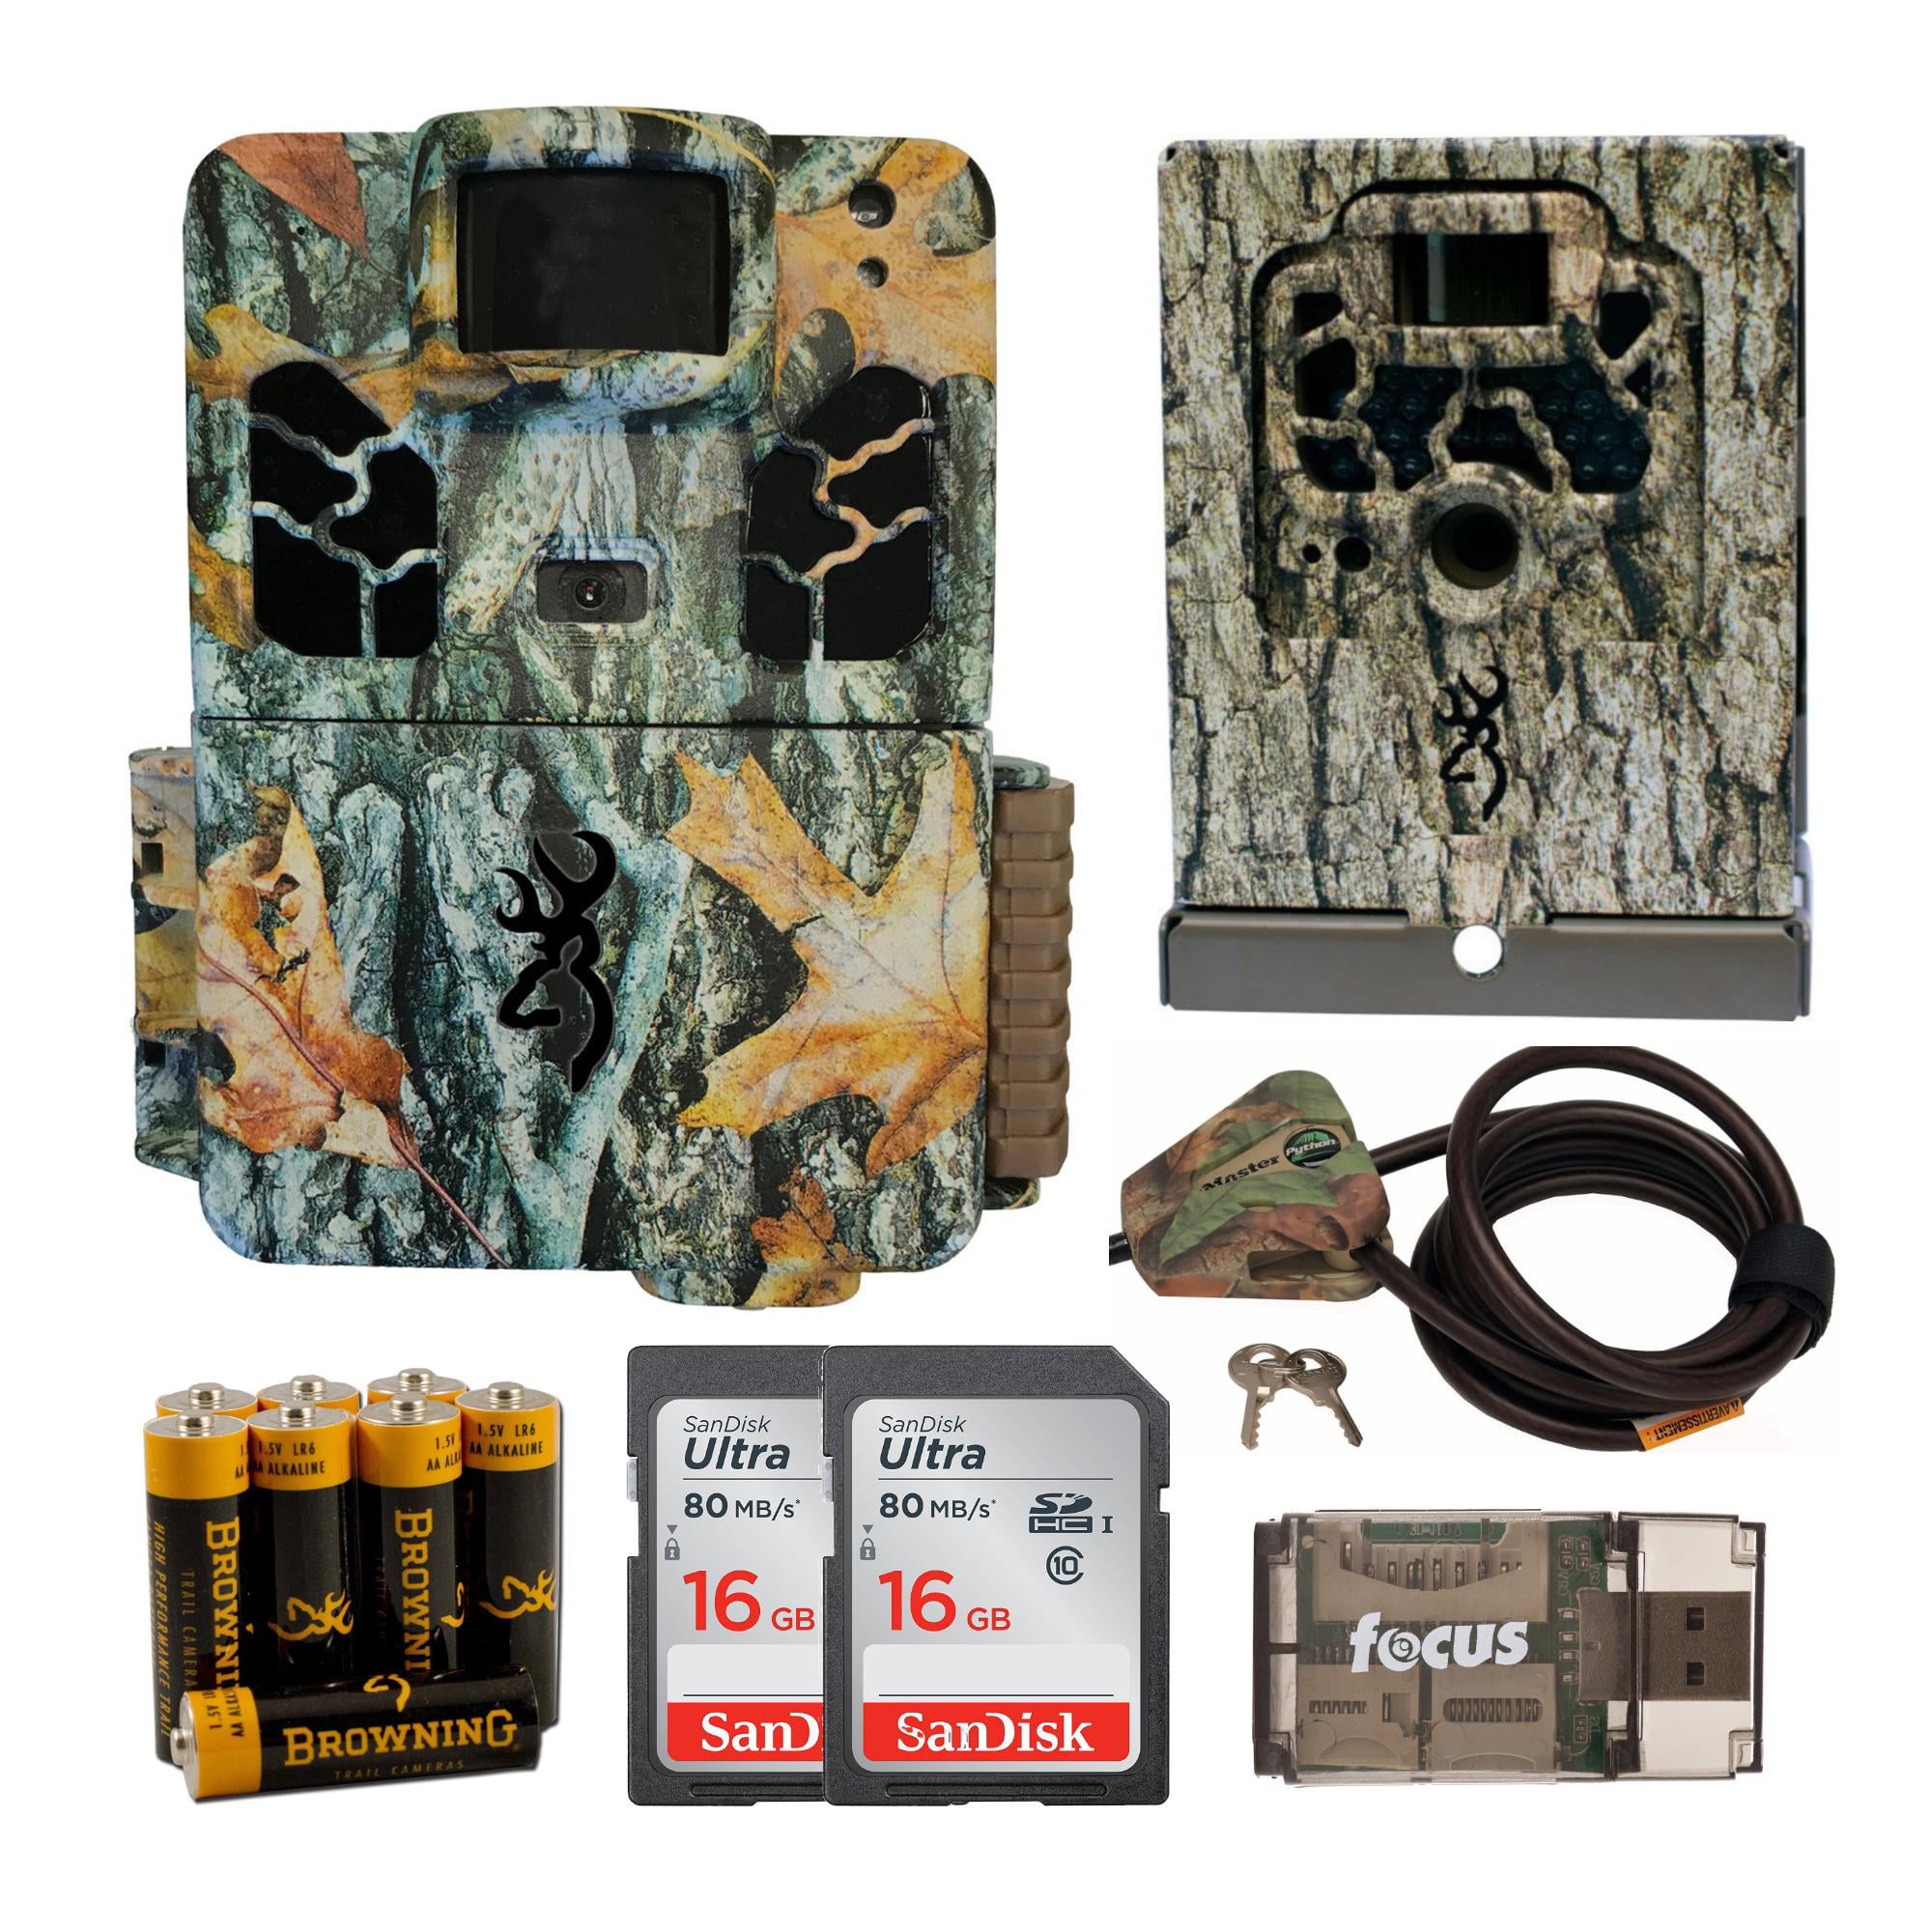 Browning Dark OPS PRO XD Dual Lens Trail Game Camera Complete Plus Package Includes 16GB Card and J-TECH Card Reader BTC6PXD 24MP